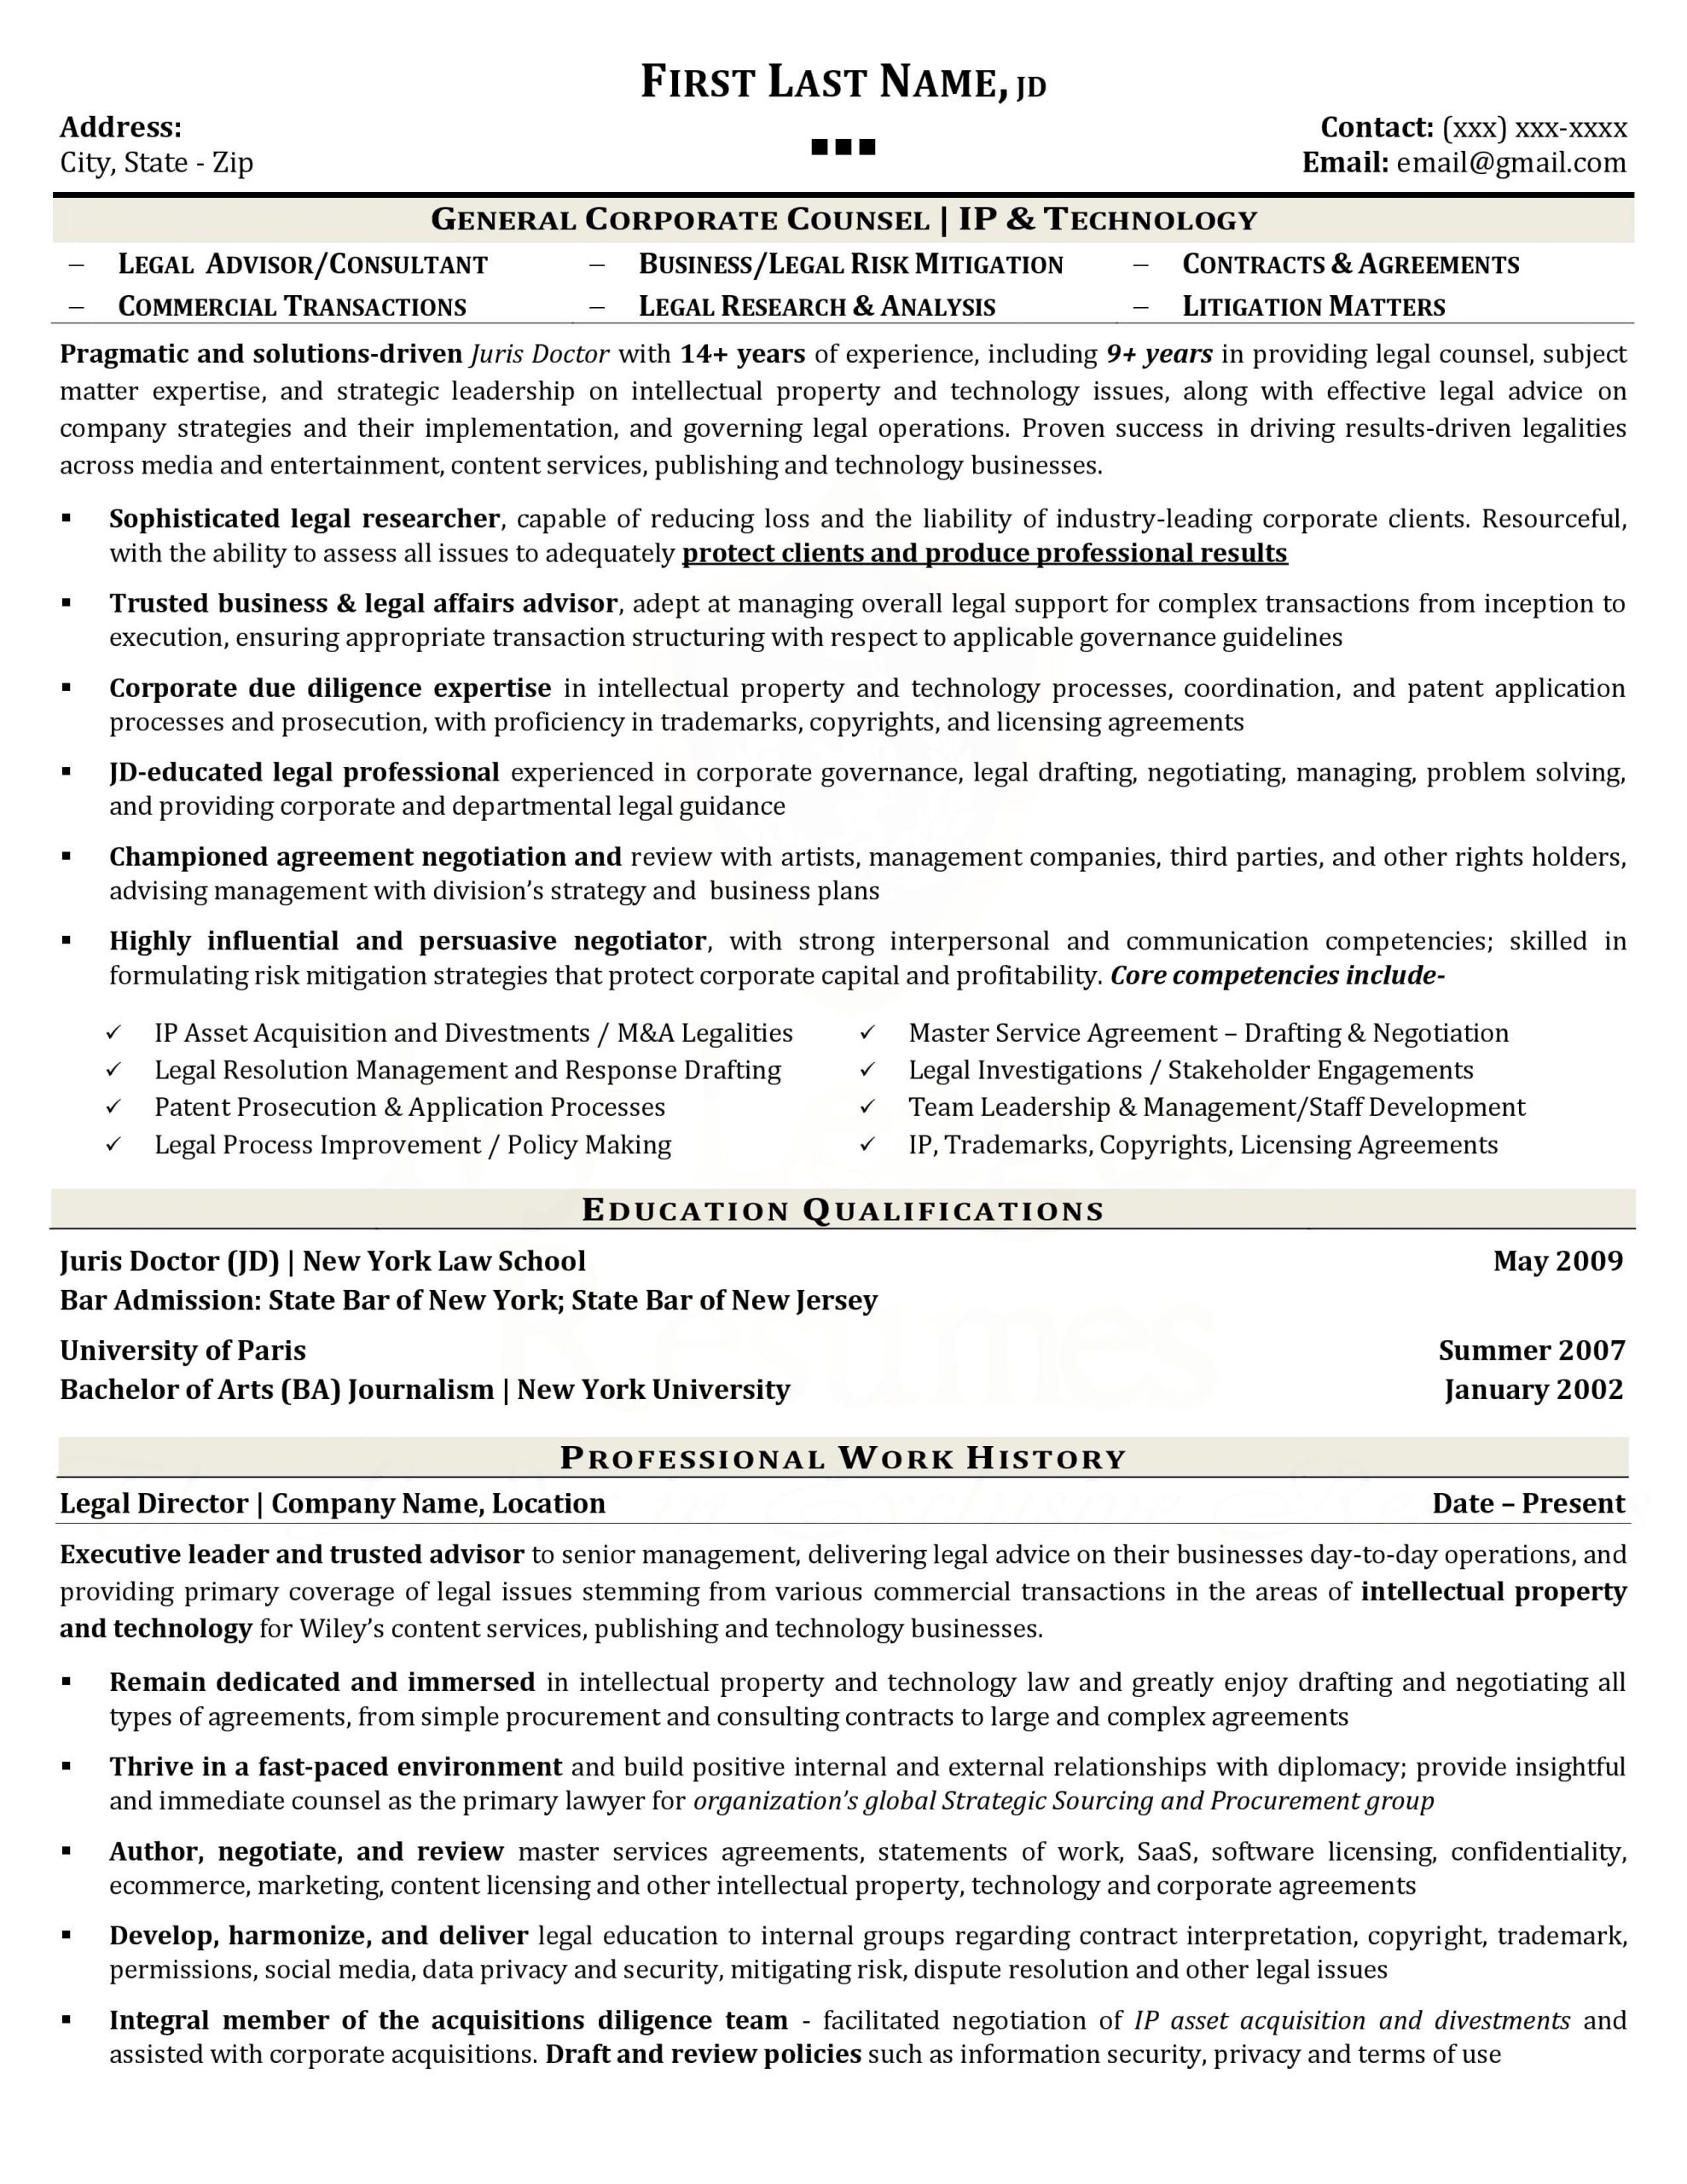 Sample College Application Resume Ivy League Sample College Application Resume Ivy League – Resume